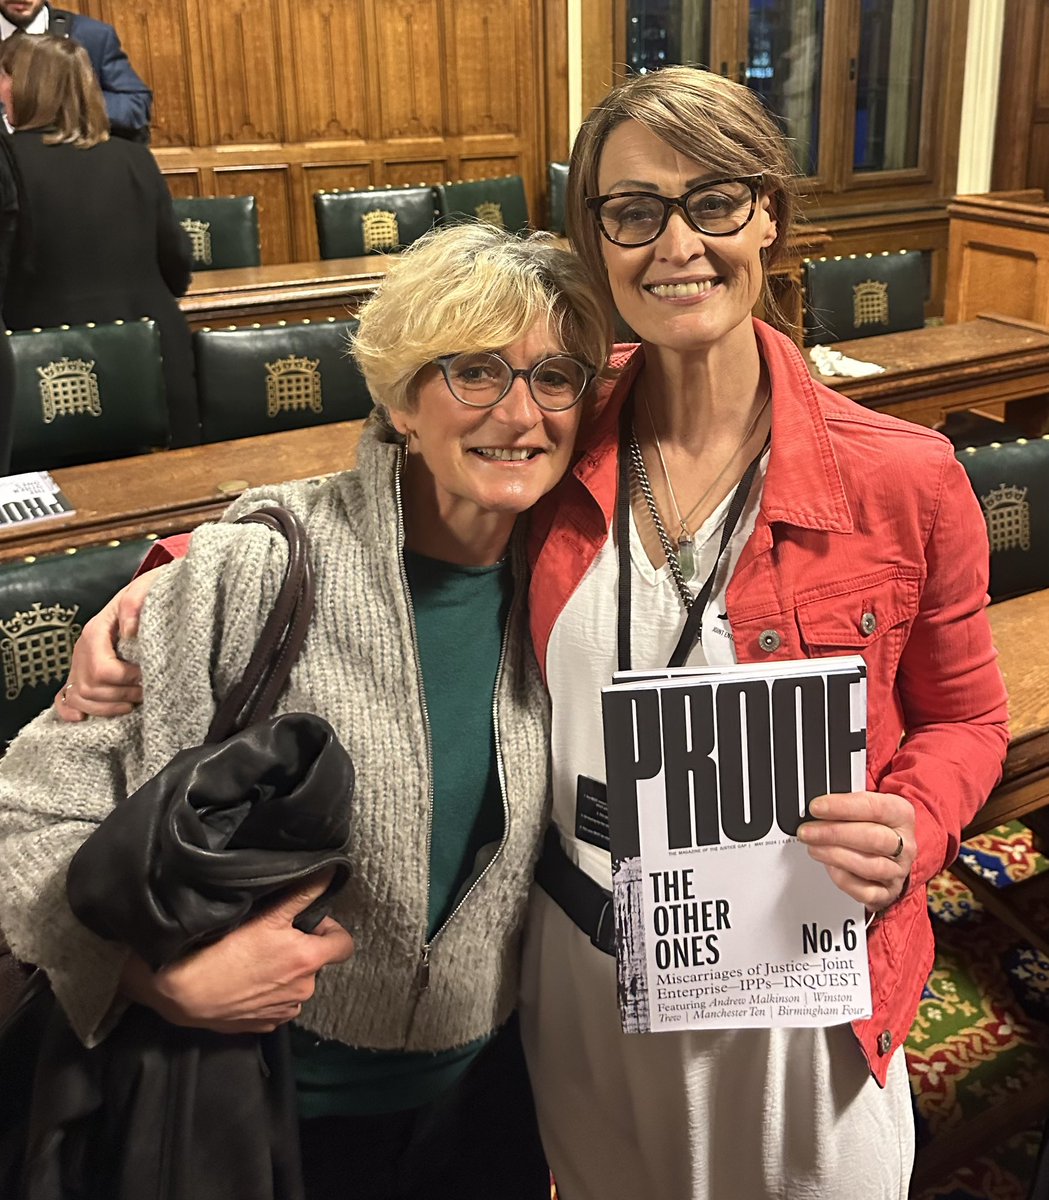 @PhilippaBudgen I’m looking through all the photographs taken at the @HouseofCommons this week and this is one my favourites @sounddelivery @JENGbA @APPGMJ @JusticeGap #PROOF launch issue 6 #injustice